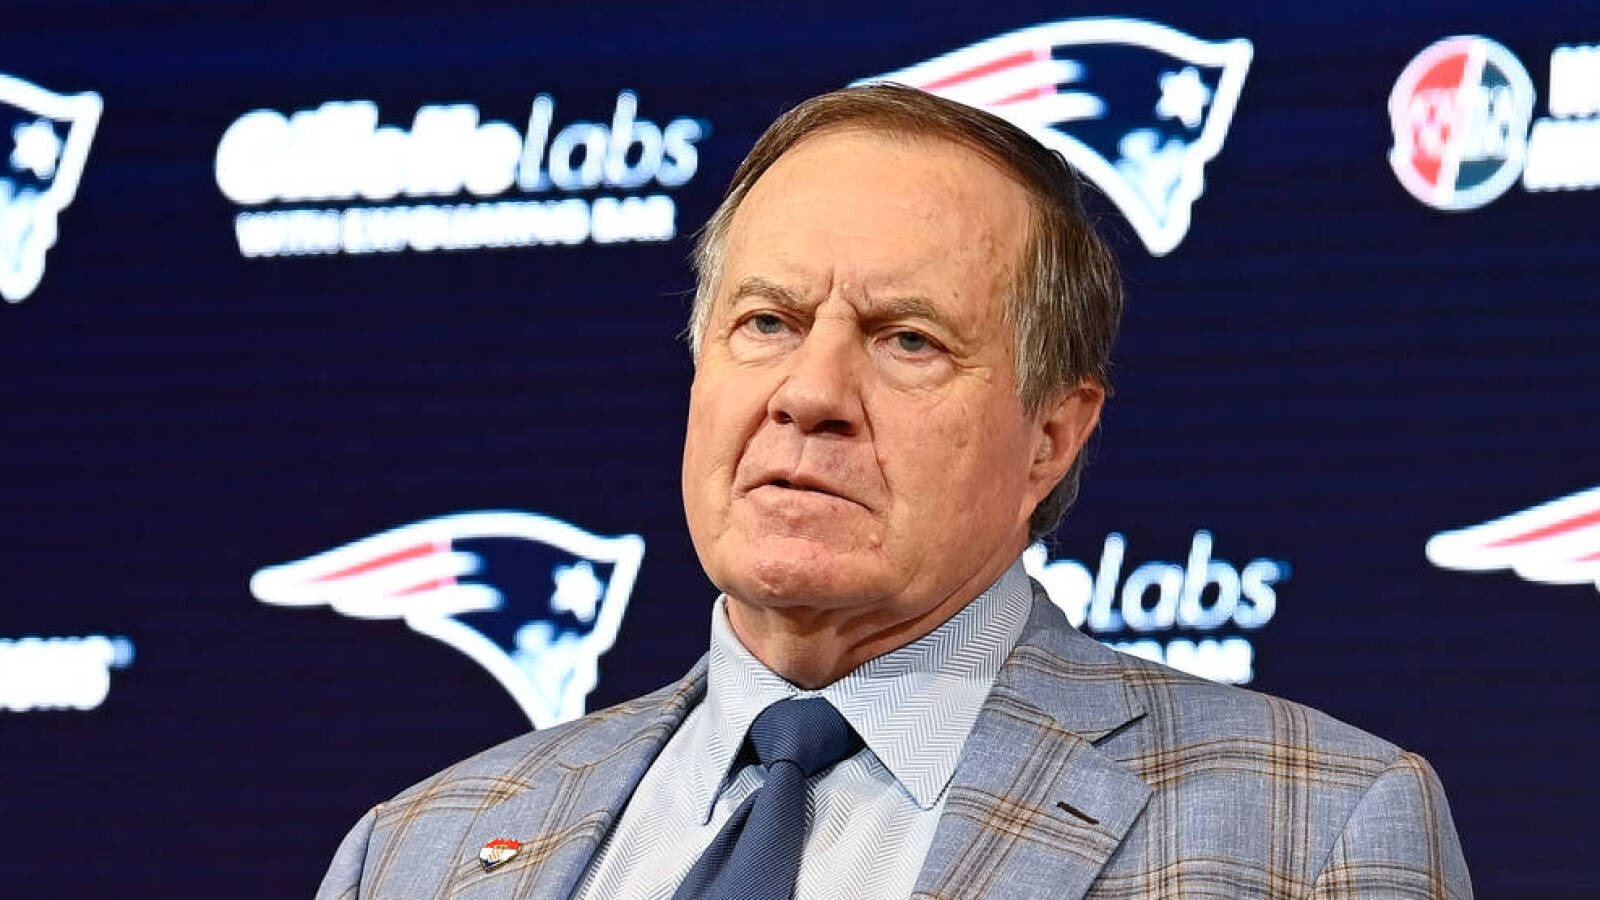 Patriots front office execs could reportedly join Bill Belichick with new team